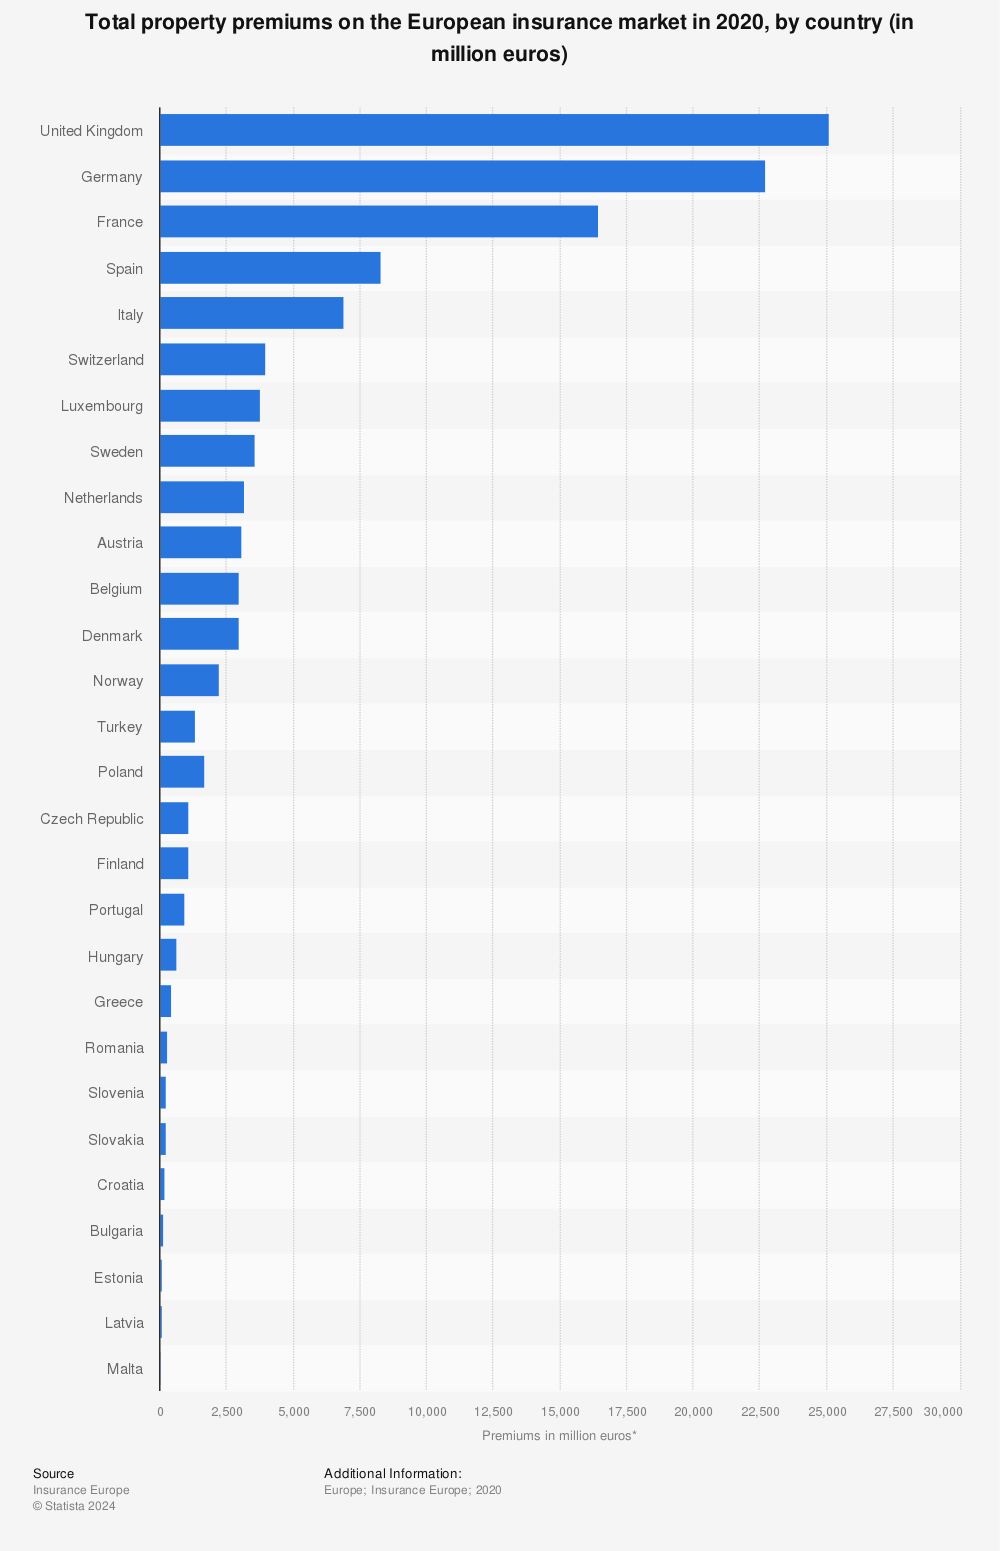 Statistic: Total property premiums on the European insurance market in 2020, by country (in million euros) | Statista